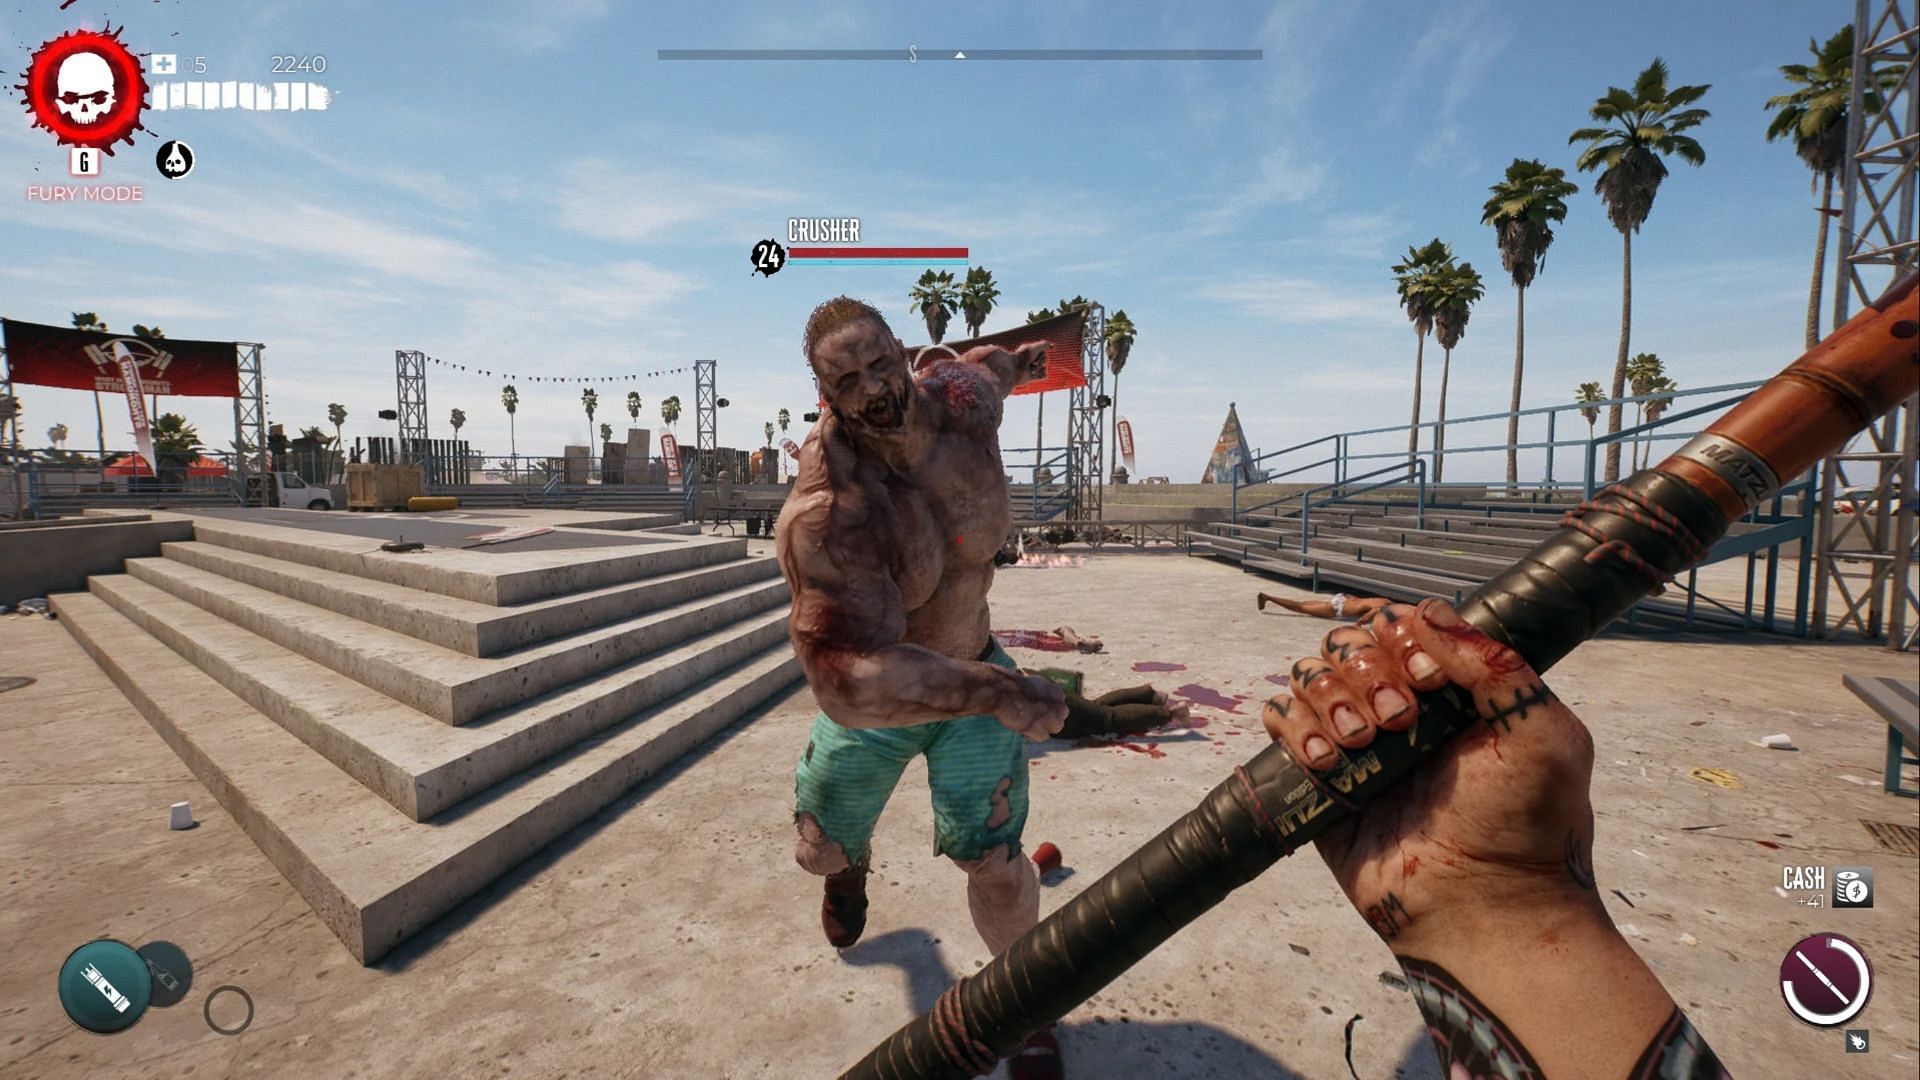 Crushers are big and tough, but you can defeat them in Dead Island 2.